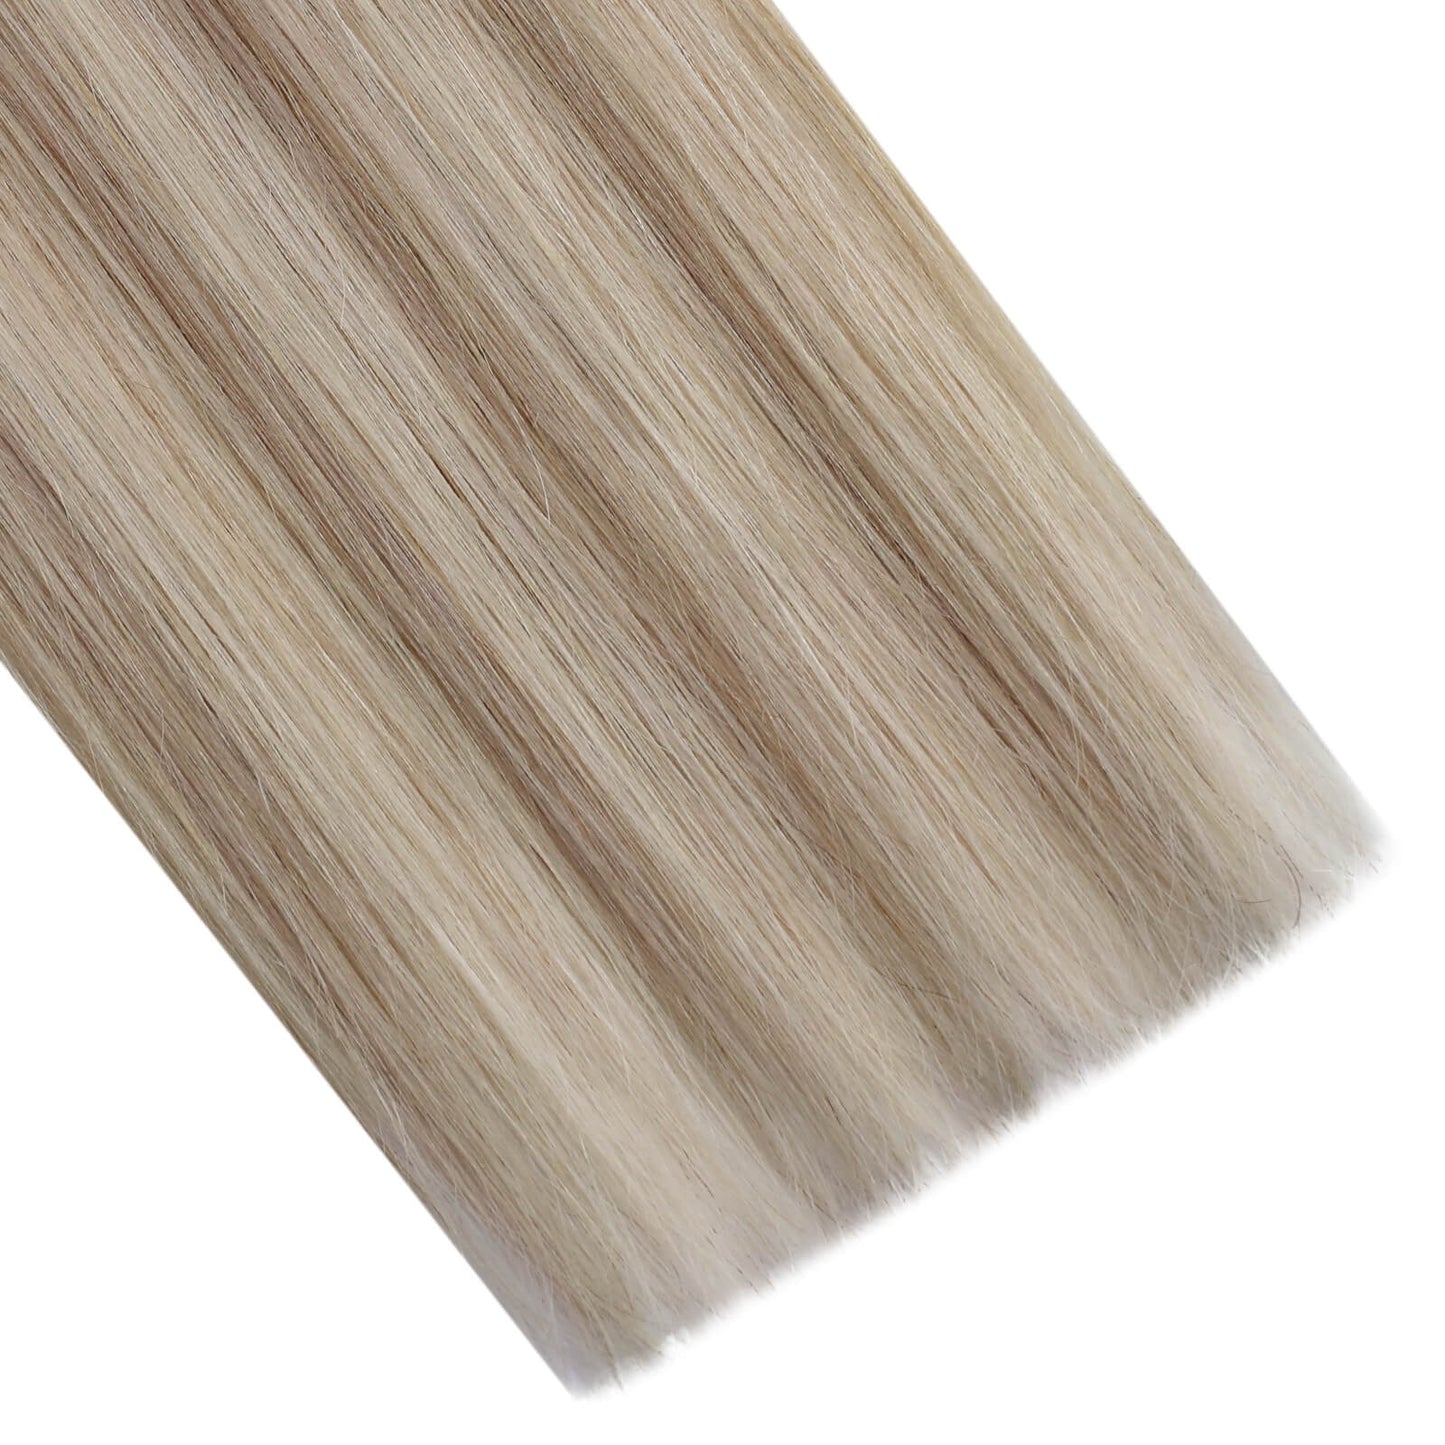 straight micro link hair extensions wholesale human hair extensions